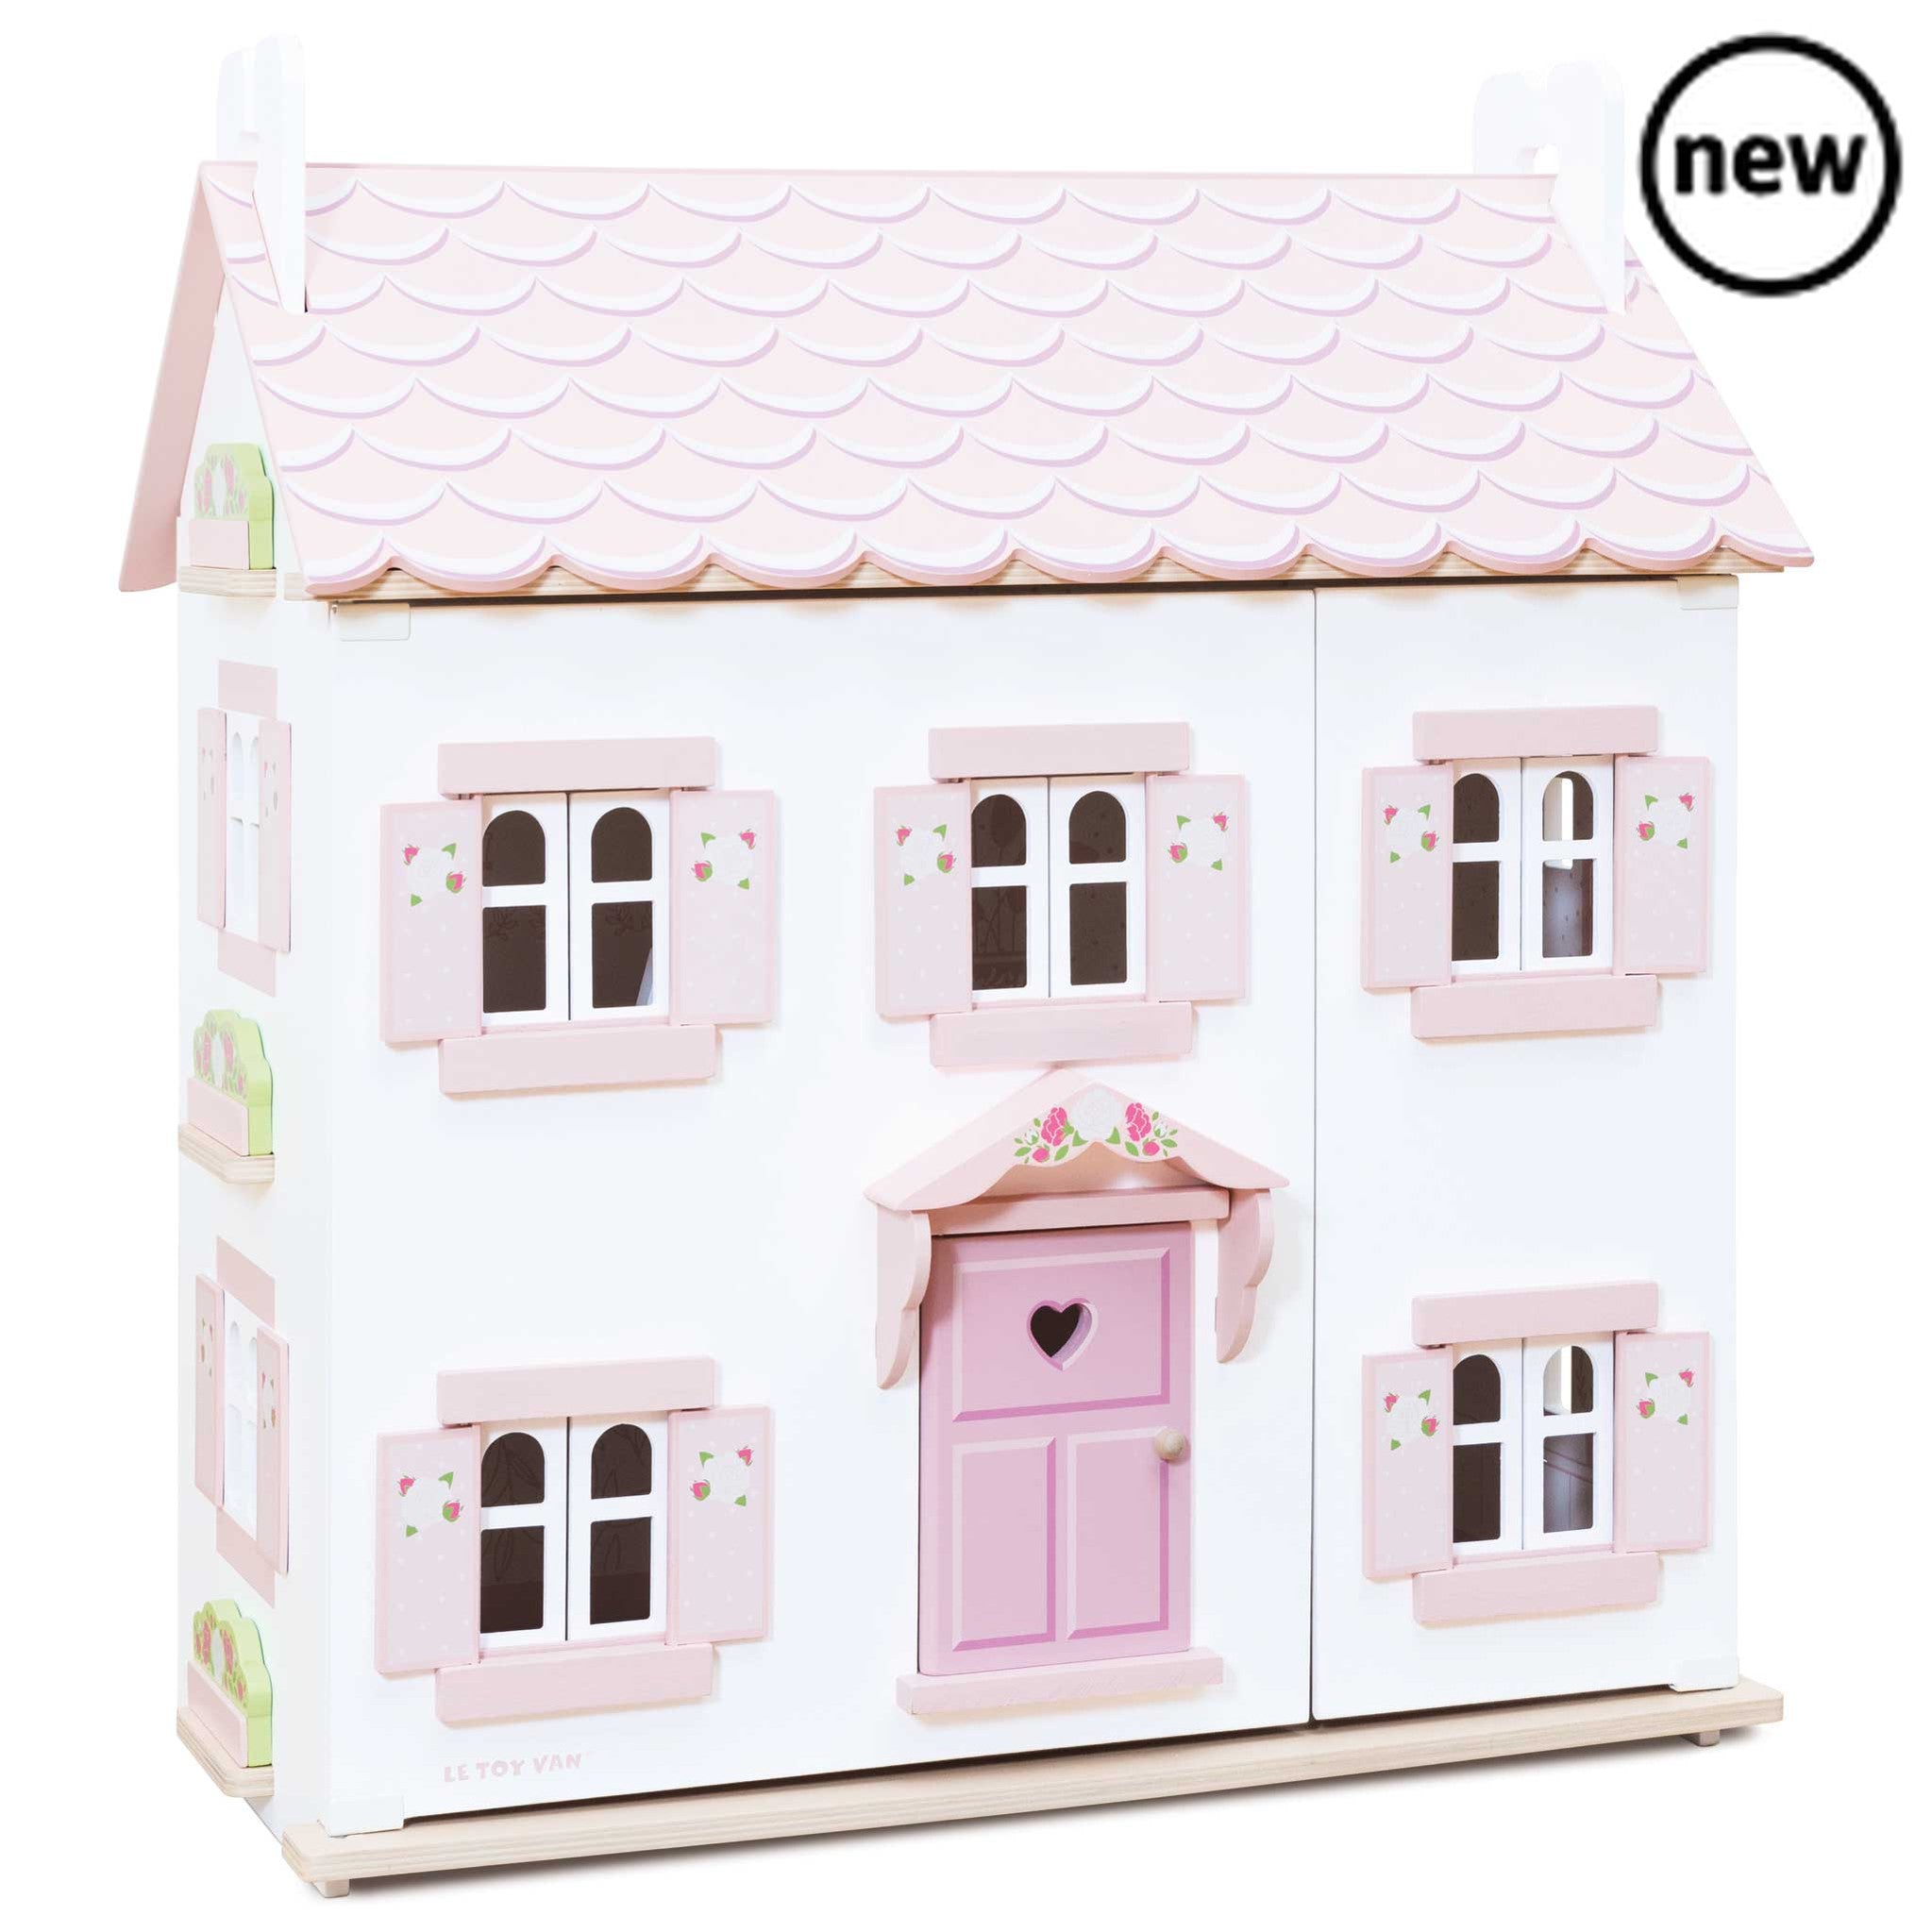 Sophie's Wooden Dolls House, Description Our much loved, multi award winning Sophie's Wooden Dolls House is a true classic. This delightful three storey miniature home features a timeless look with everything little learners could dream of. Full of nostalgic charm, this wonderful doll house is painted in the prettiest pastel pink and fresh whites, with opening and closing windows and shutters, each featuring a floral motif. The cute front porch makes a welcoming entrance for little guests. Brimming with the